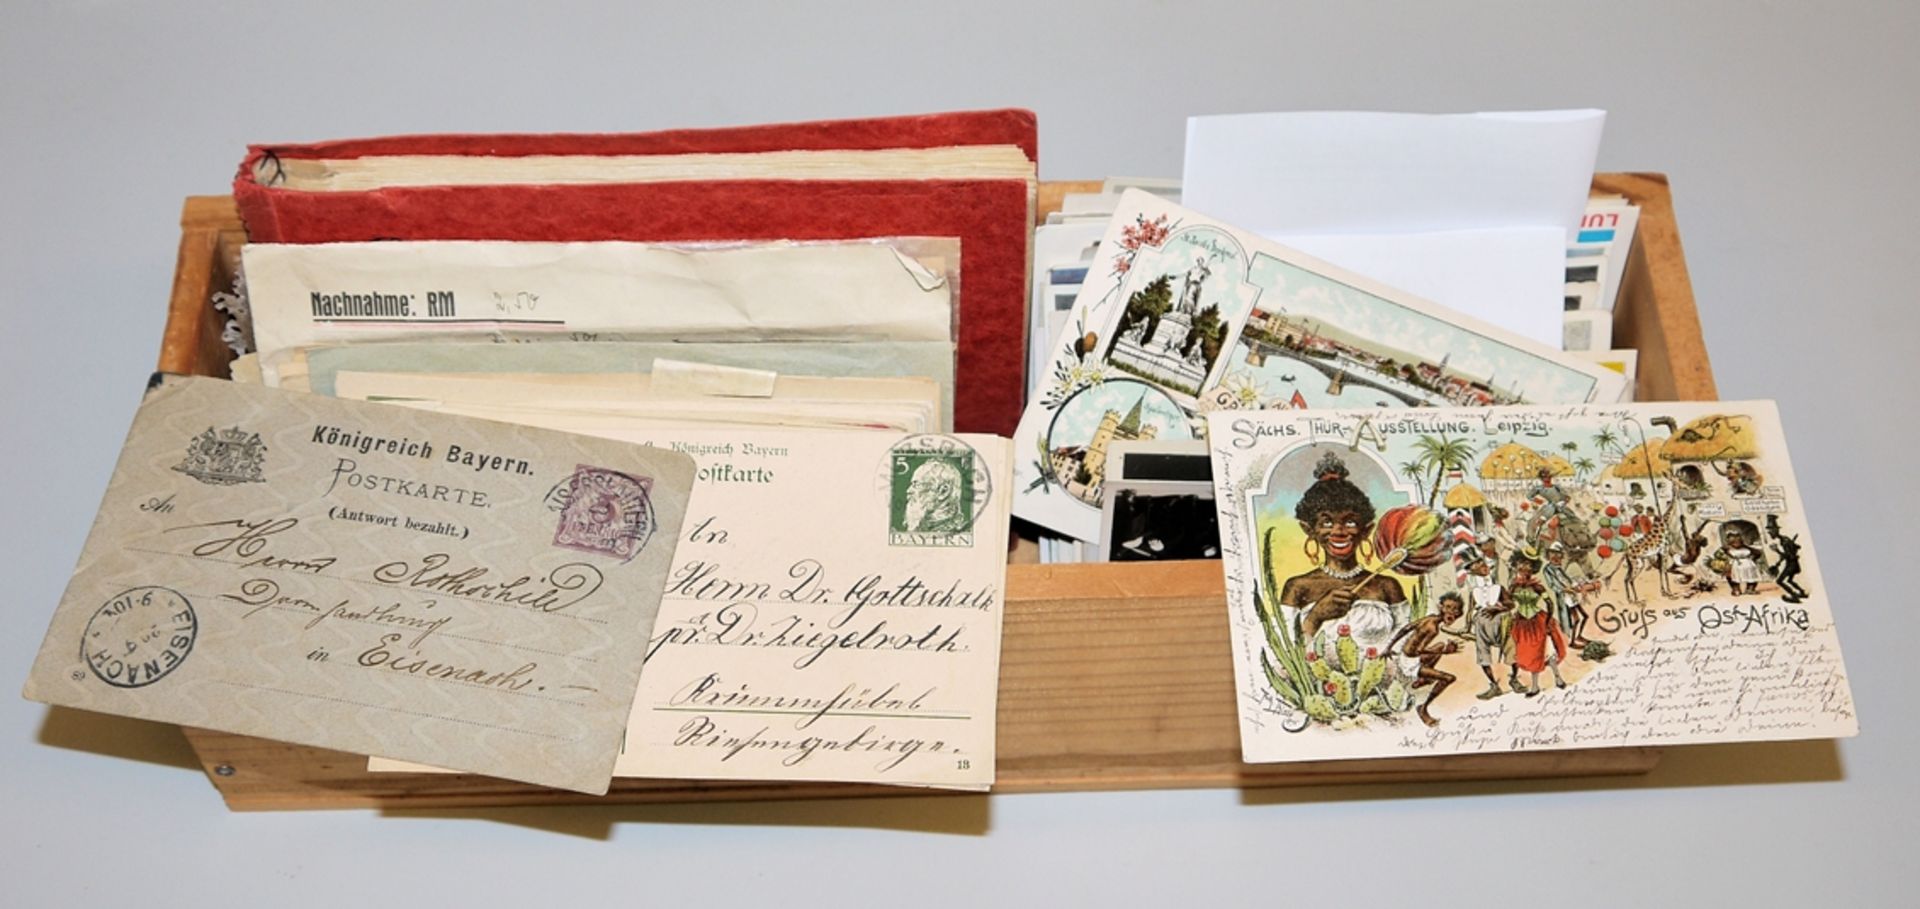 Large collection of picture postcards, postal stationery and letters, mostly German imperial period